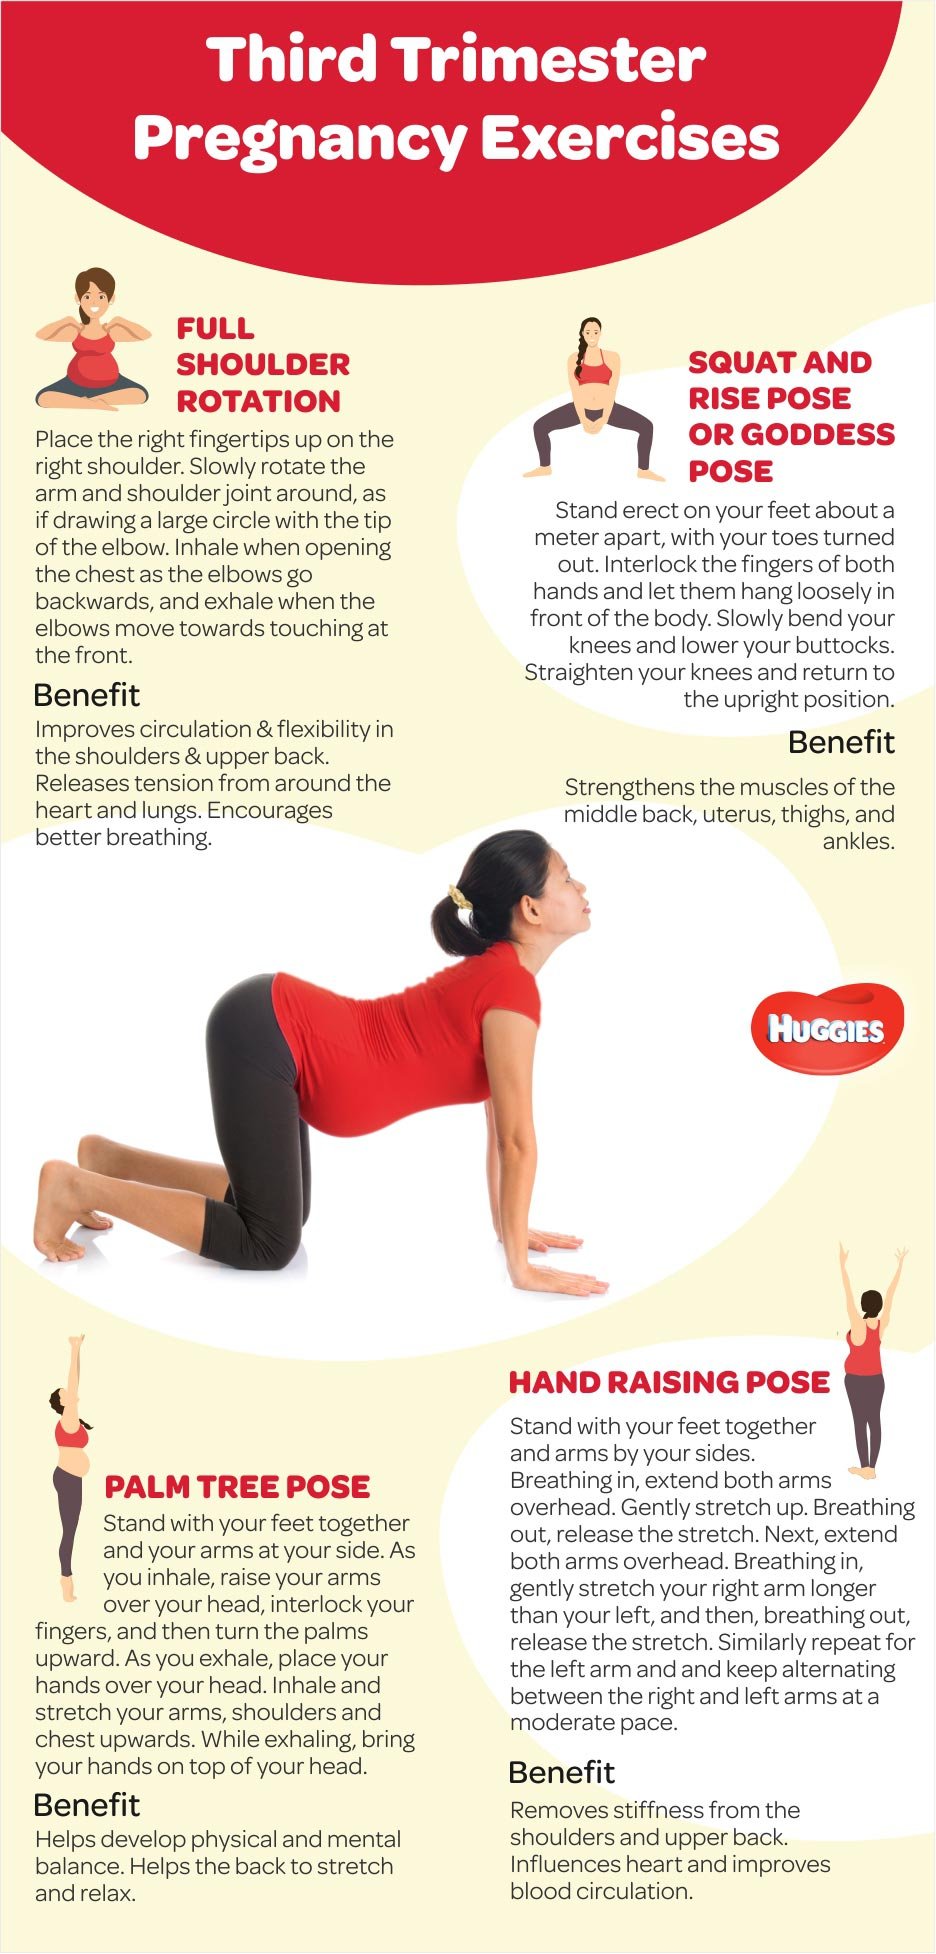 Yoga Poses and Practices to Avoid During Pregnancy - DoYou